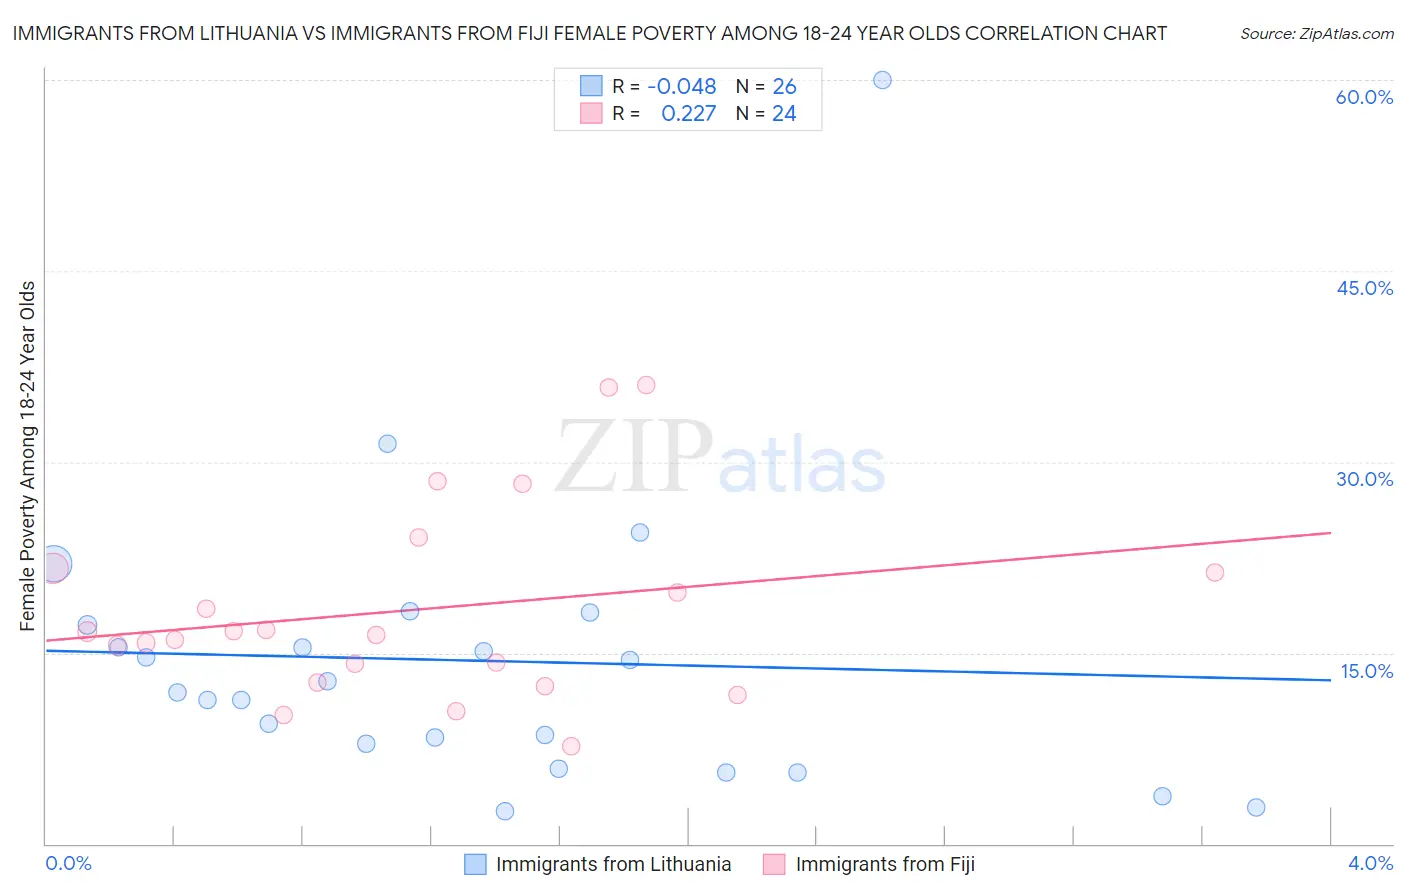 Immigrants from Lithuania vs Immigrants from Fiji Female Poverty Among 18-24 Year Olds